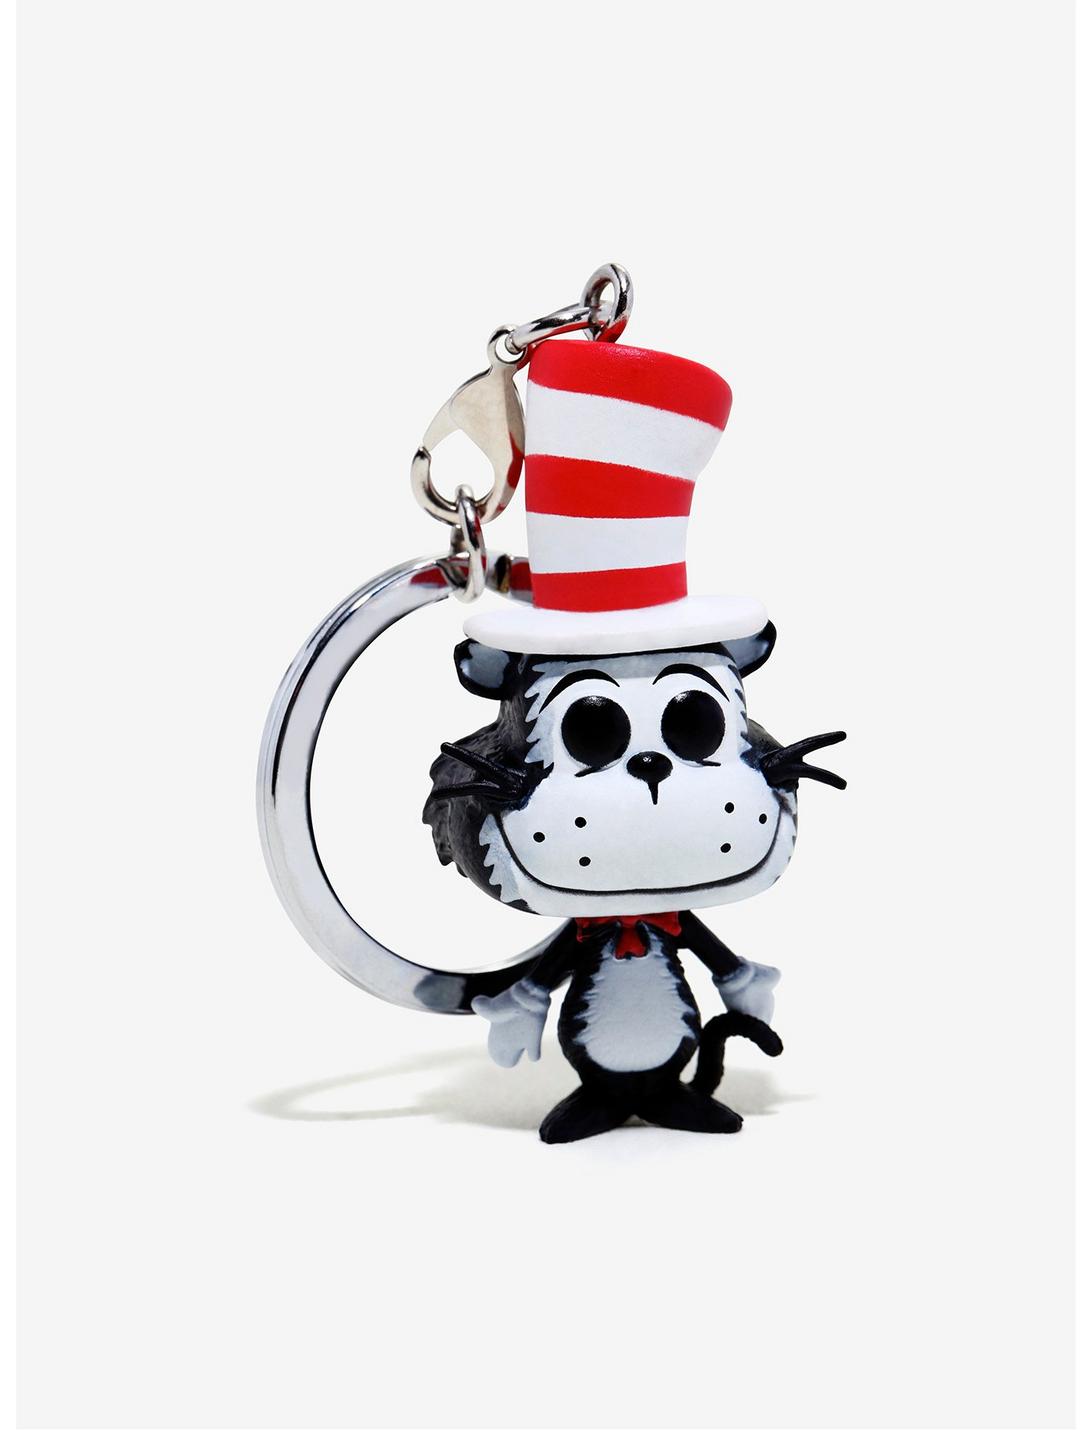 Funko Pocket Pop! Dr. Seuss The Cat In The Hat Key Chain, , hi-res